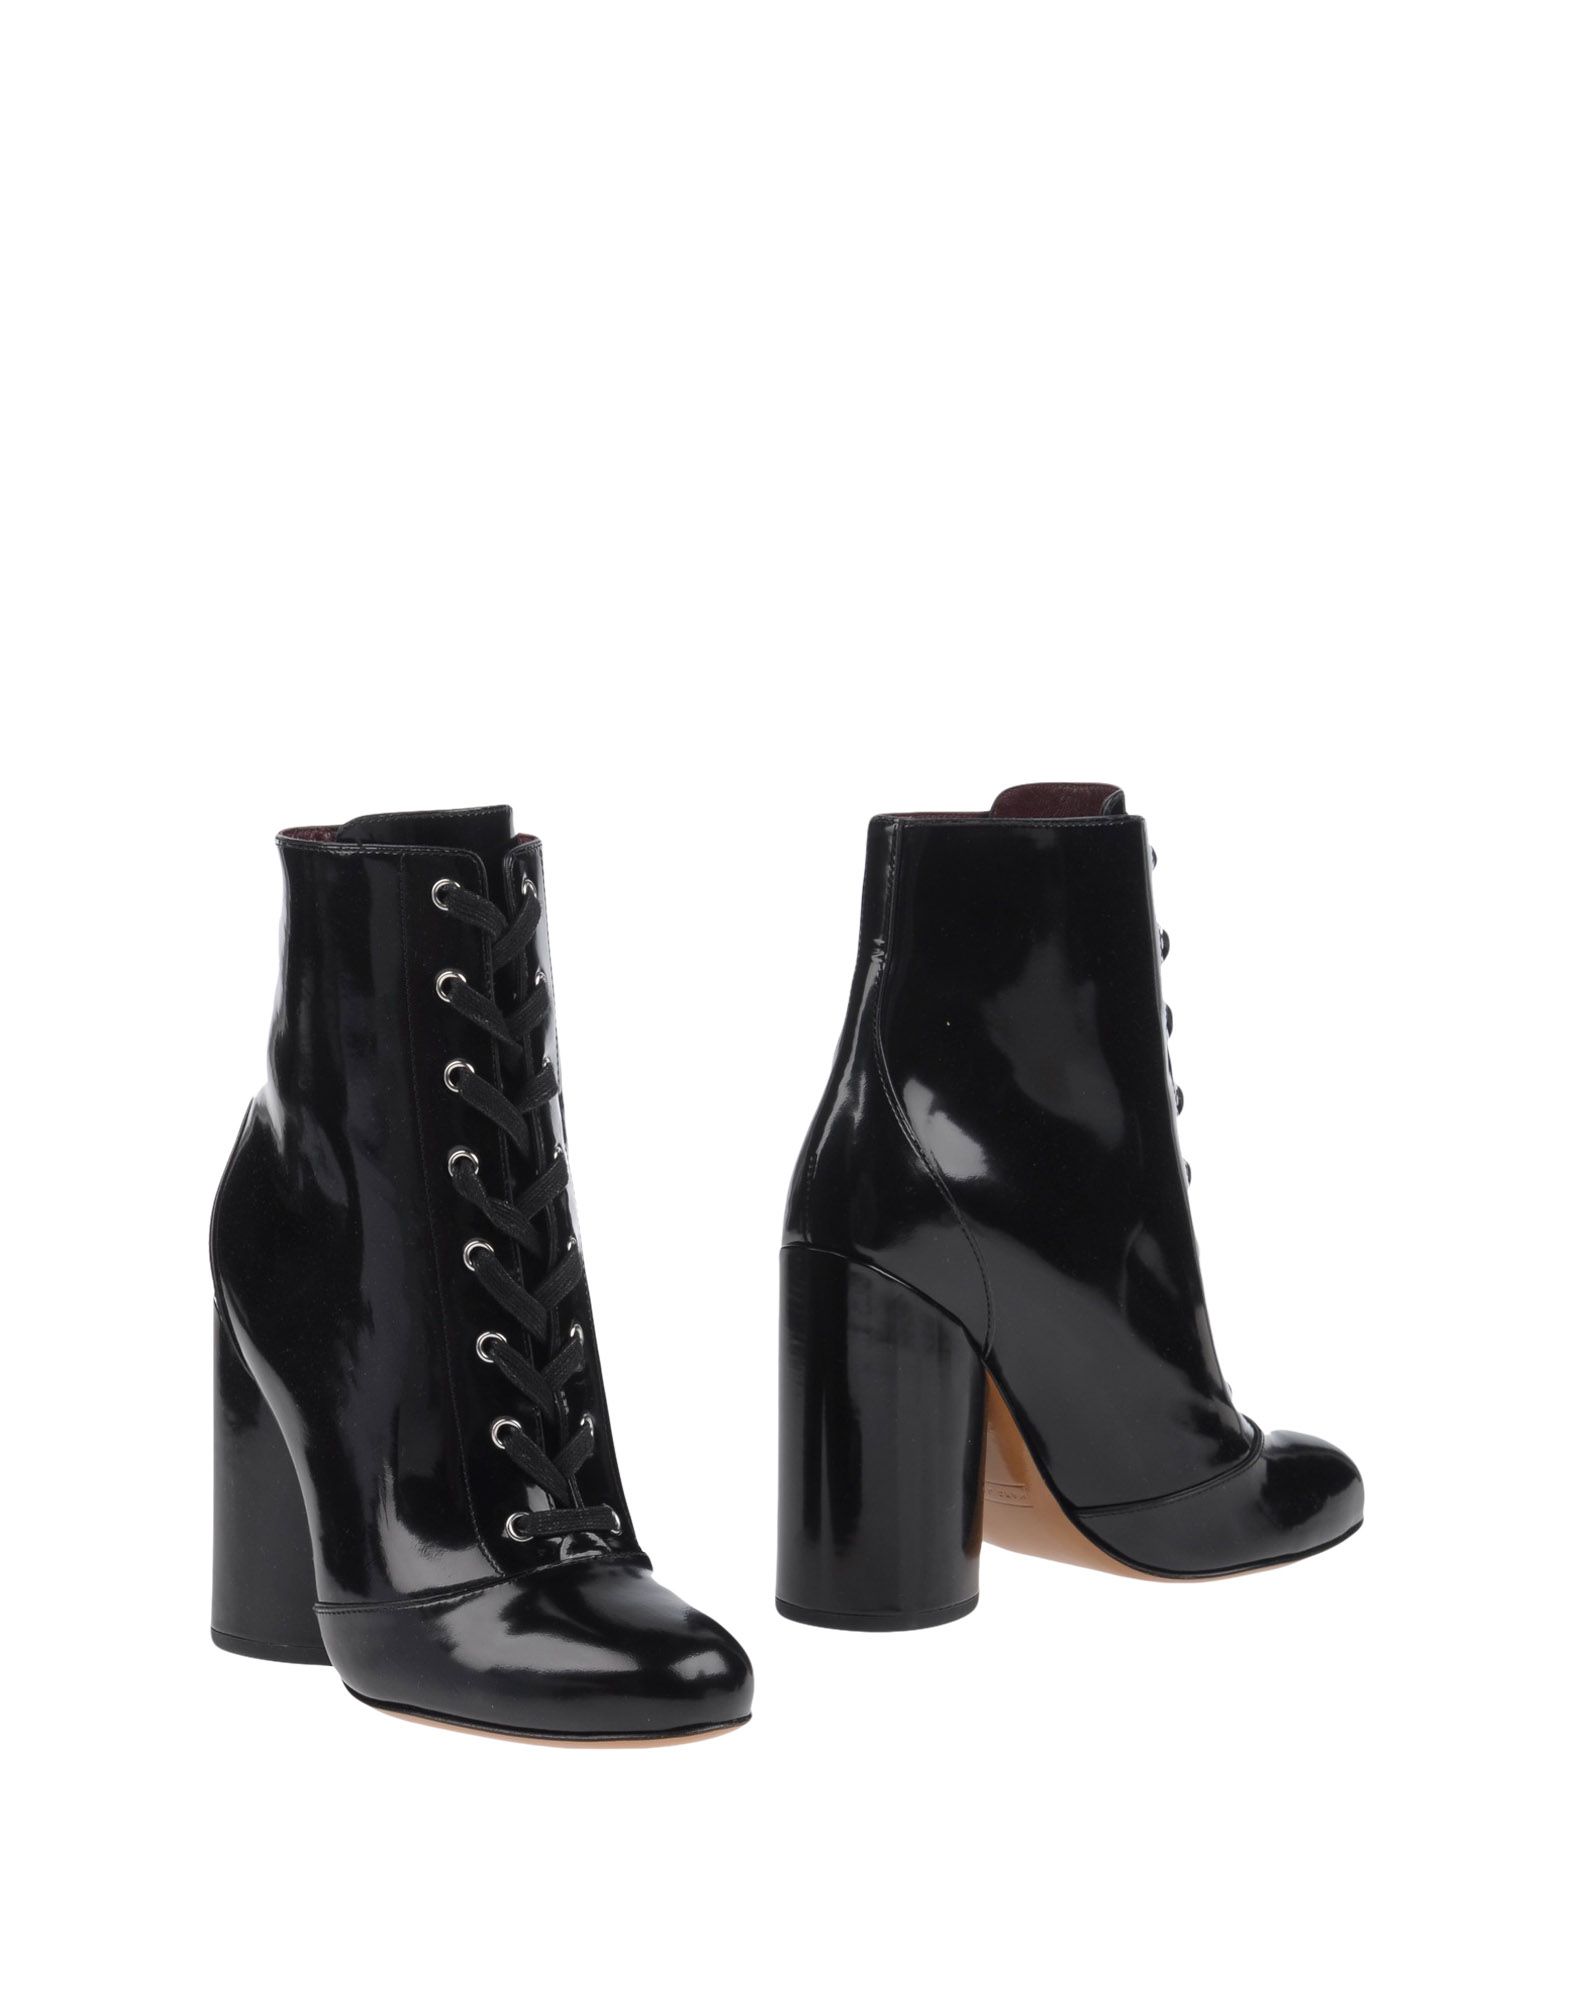 MARC JACOBS ANKLE BOOTS,11207215JP 15